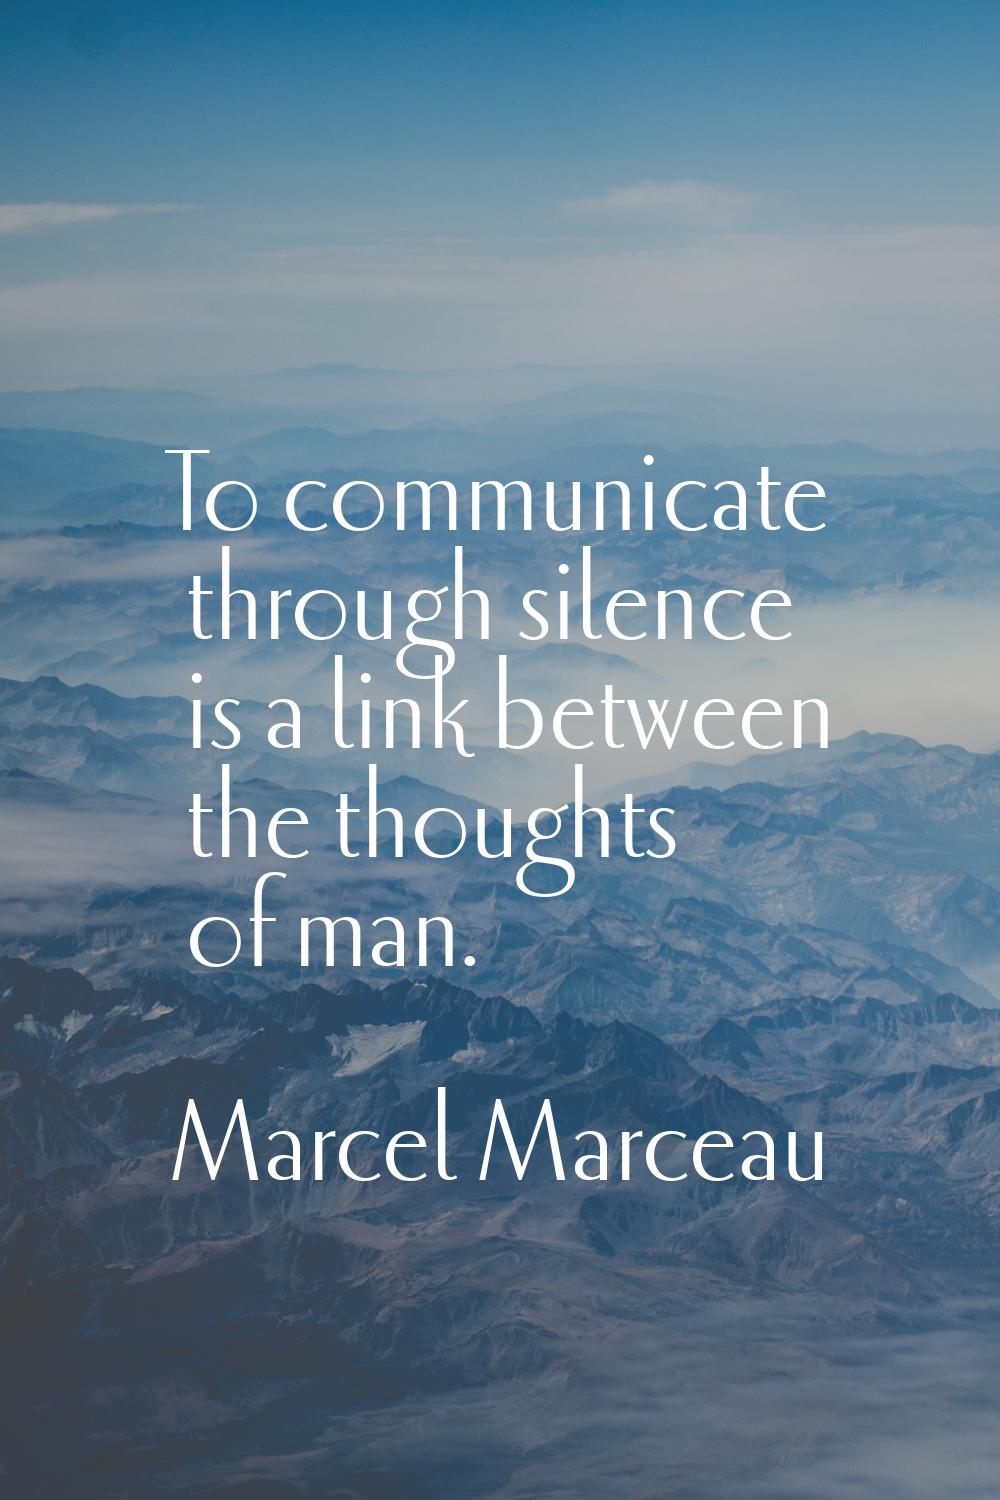 To communicate through silence is a link between the thoughts of man.